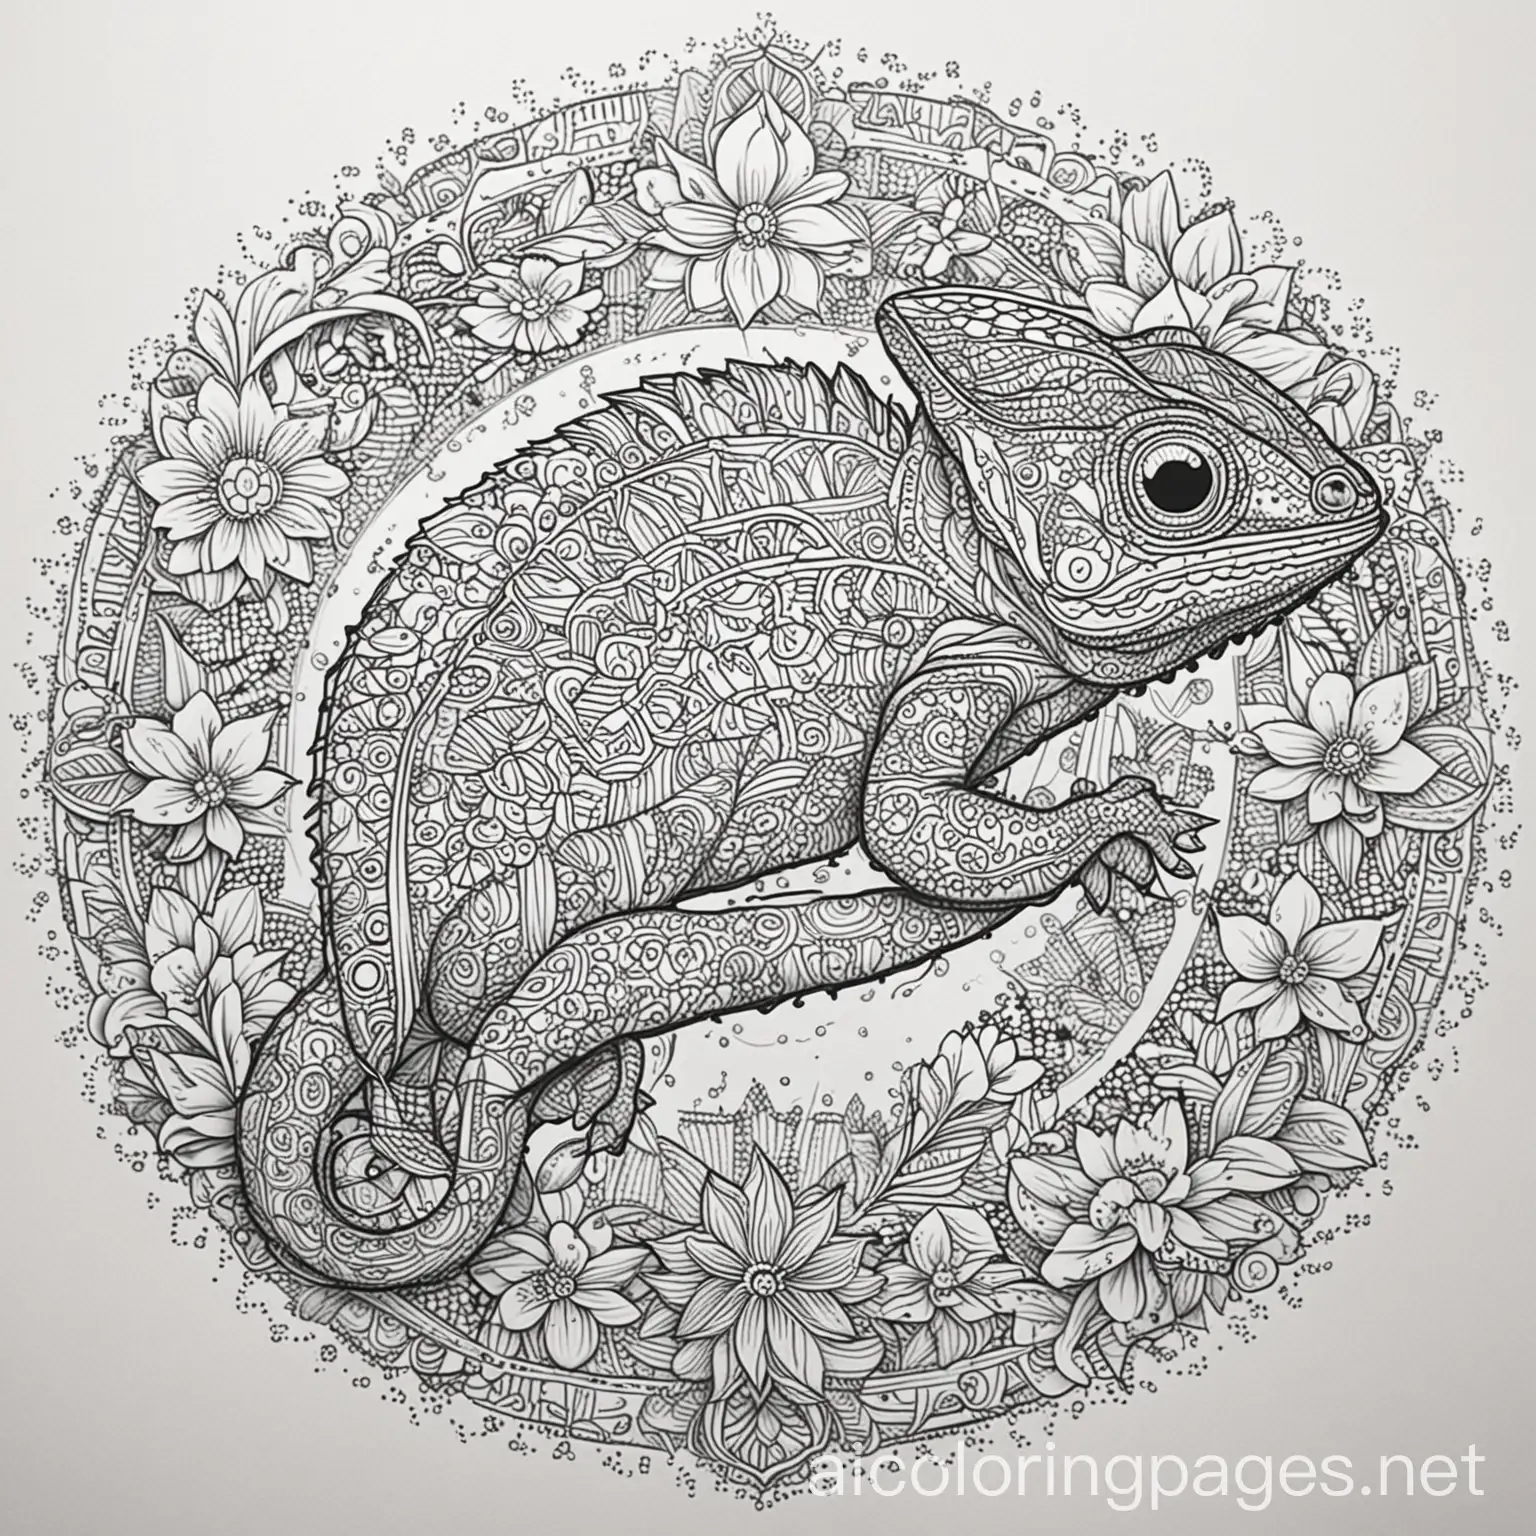 A Chameleon with vivid pattern inside of it, mandala design, coloring book photo, thick lines, no black dots, just outline,, Coloring Page, black and white, line art, flowers and vivid design outside of the mandala for the background, vivid graphics, Mandela, Ample White Space. The background of the coloring page is plain white to make it hard for seniors to color within the lines. The outlines of all the subjects are easy to distinguish, making much difficulty., Coloring Page, black and white, line art, white background, Simplicity, Ample White Space. The background of the coloring page is plain white to make it easy for young children to color within the lines. The outlines of all the subjects are easy to distinguish, making it simple for kids to color without too much difficulty